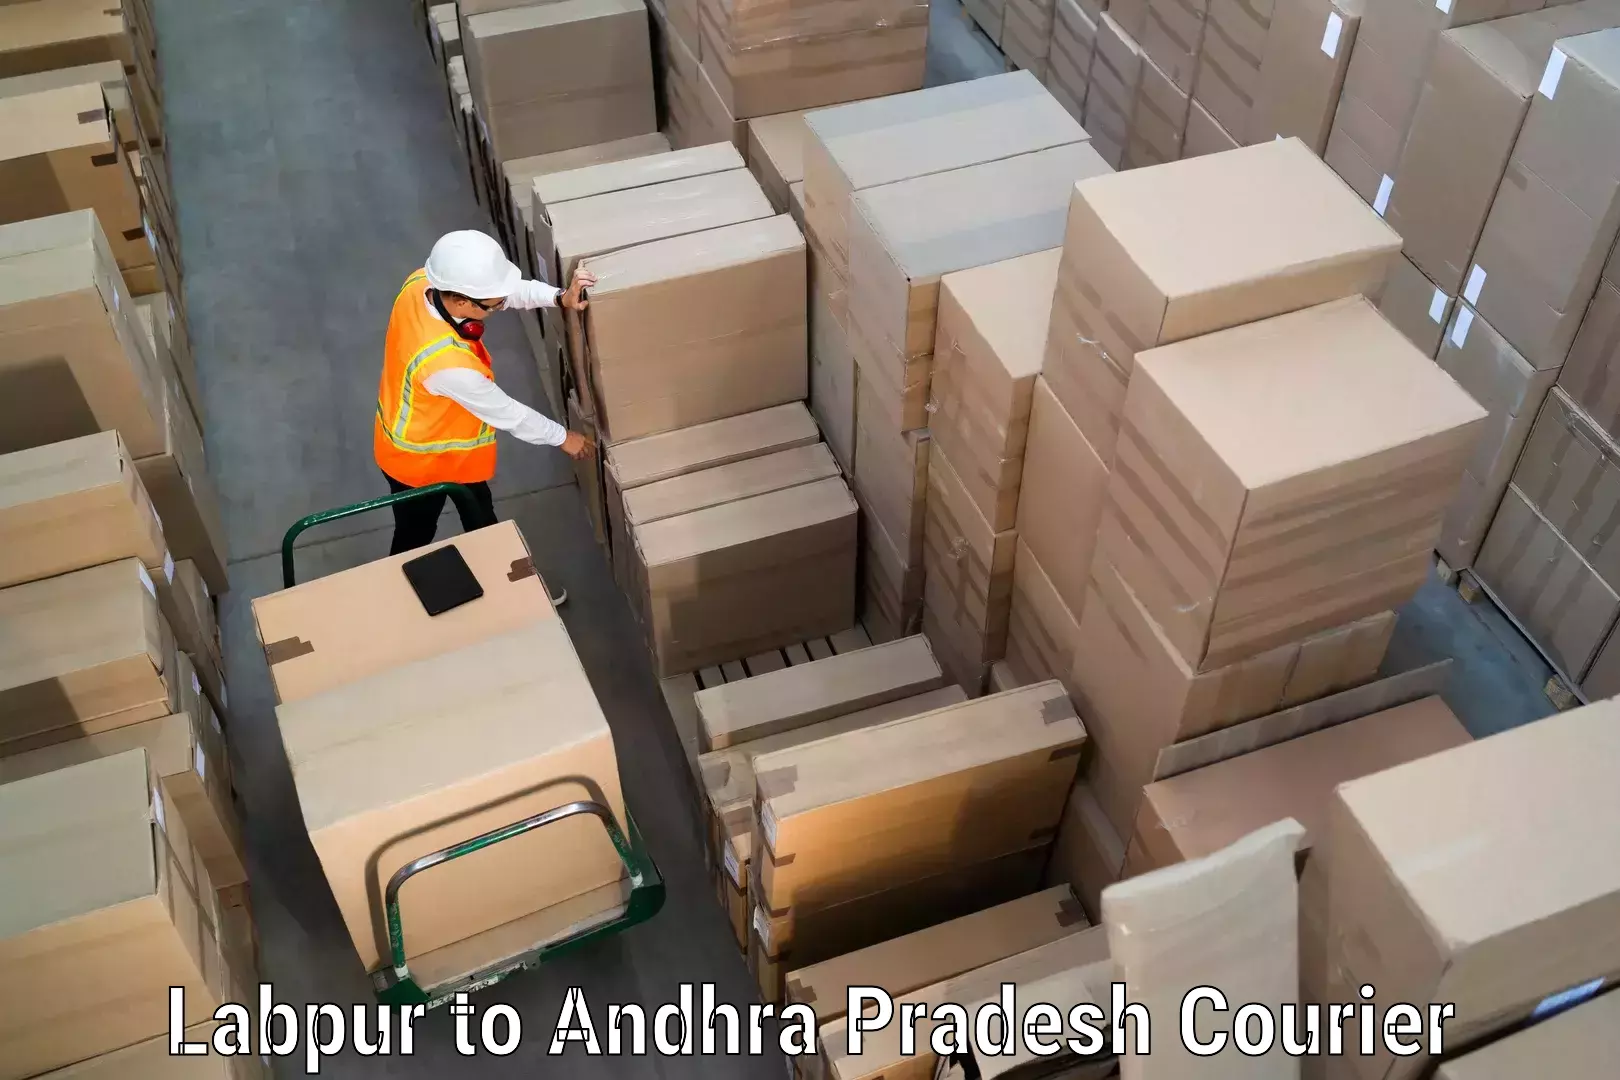 Affordable shipping solutions Labpur to Ongole